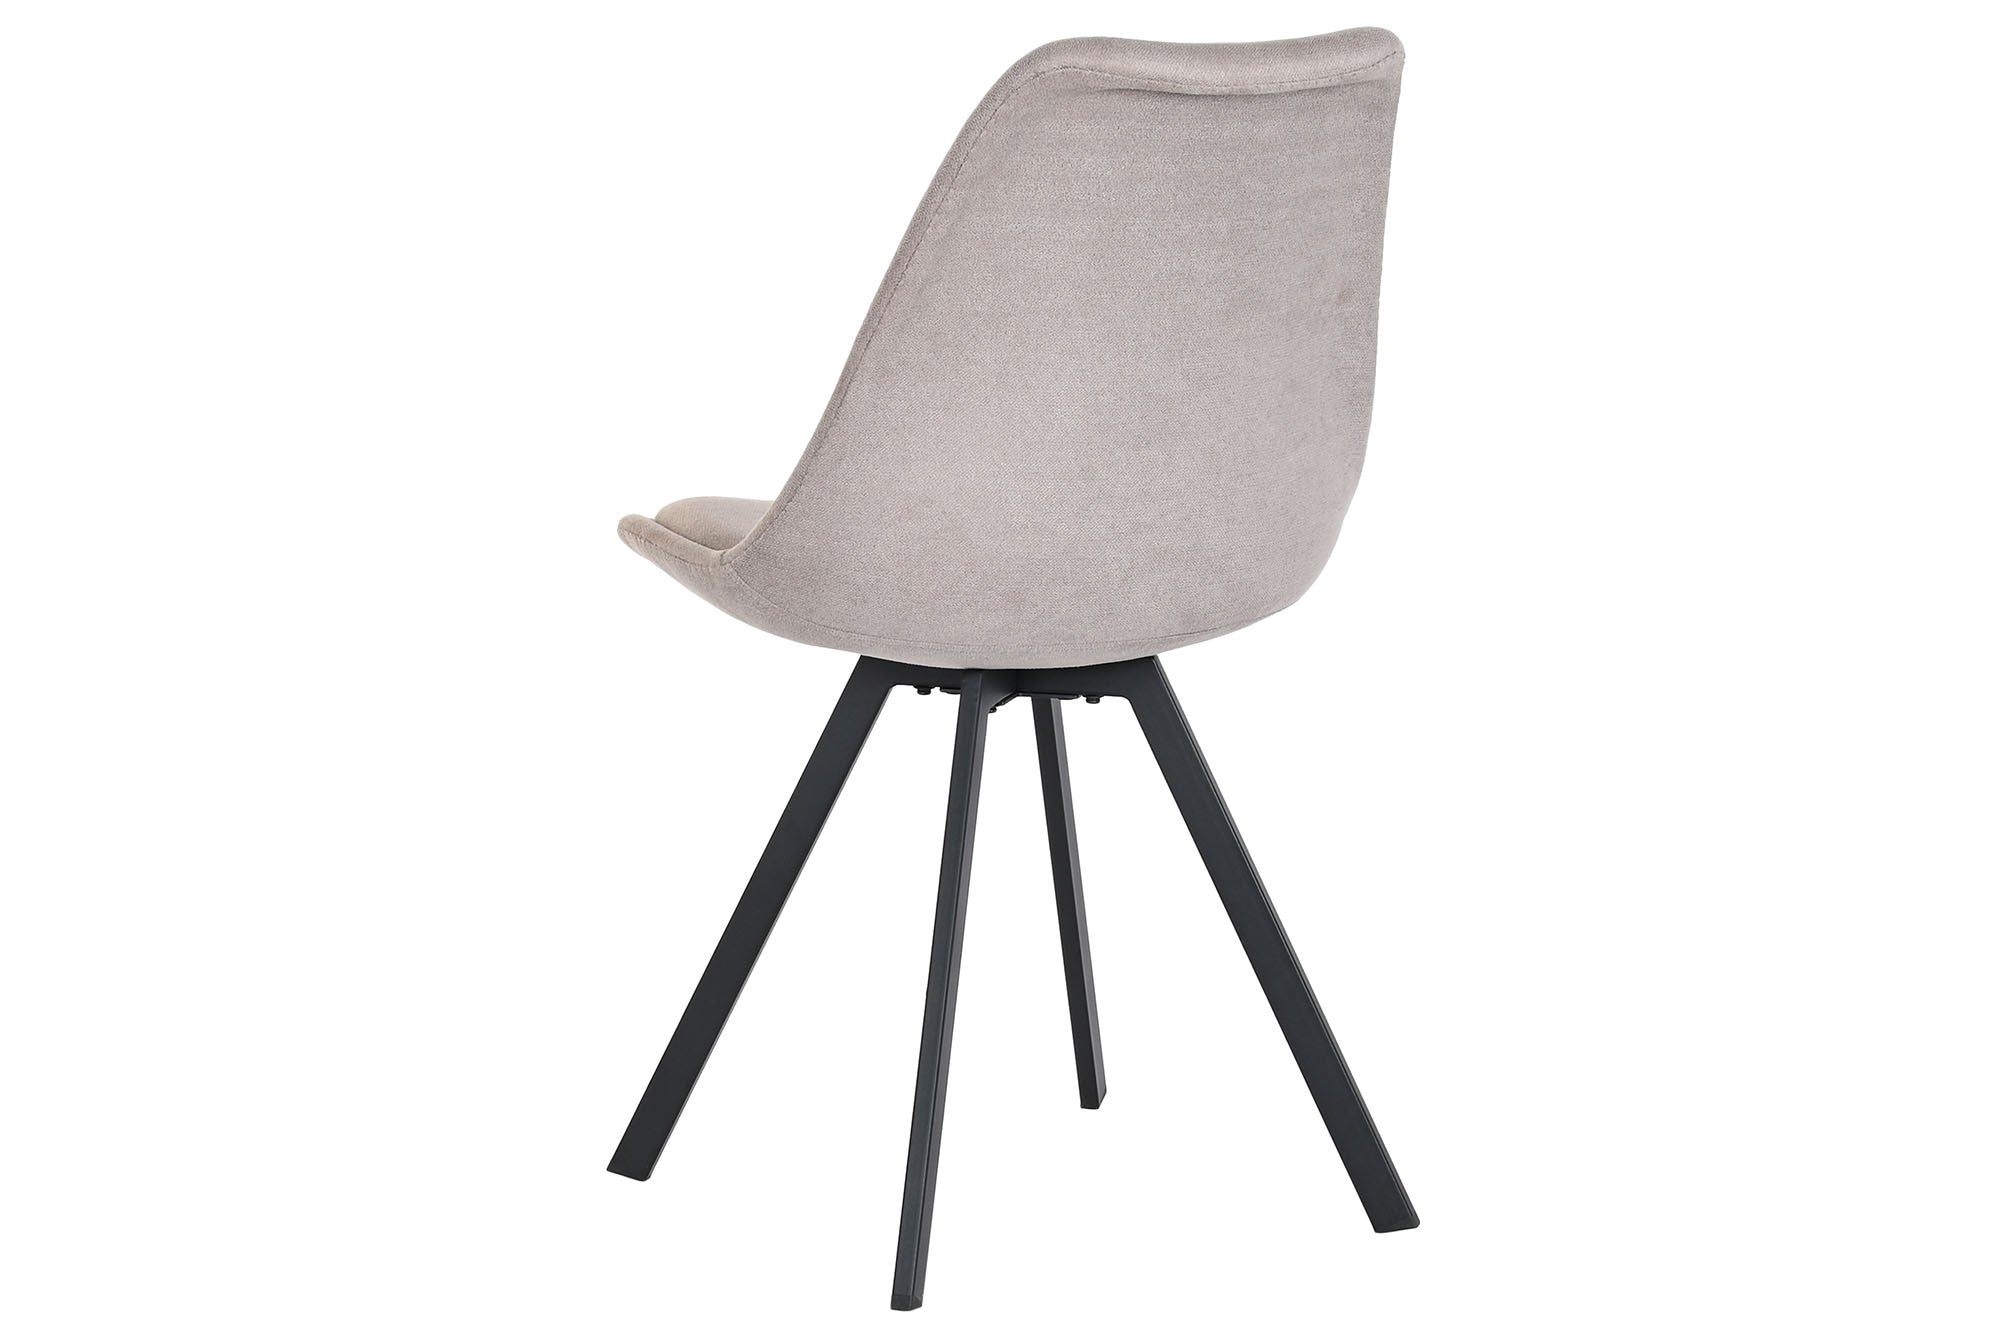 Dining Chair DKD Home Decor Grey Metal Polyester (48 x 58 x 84 cm)